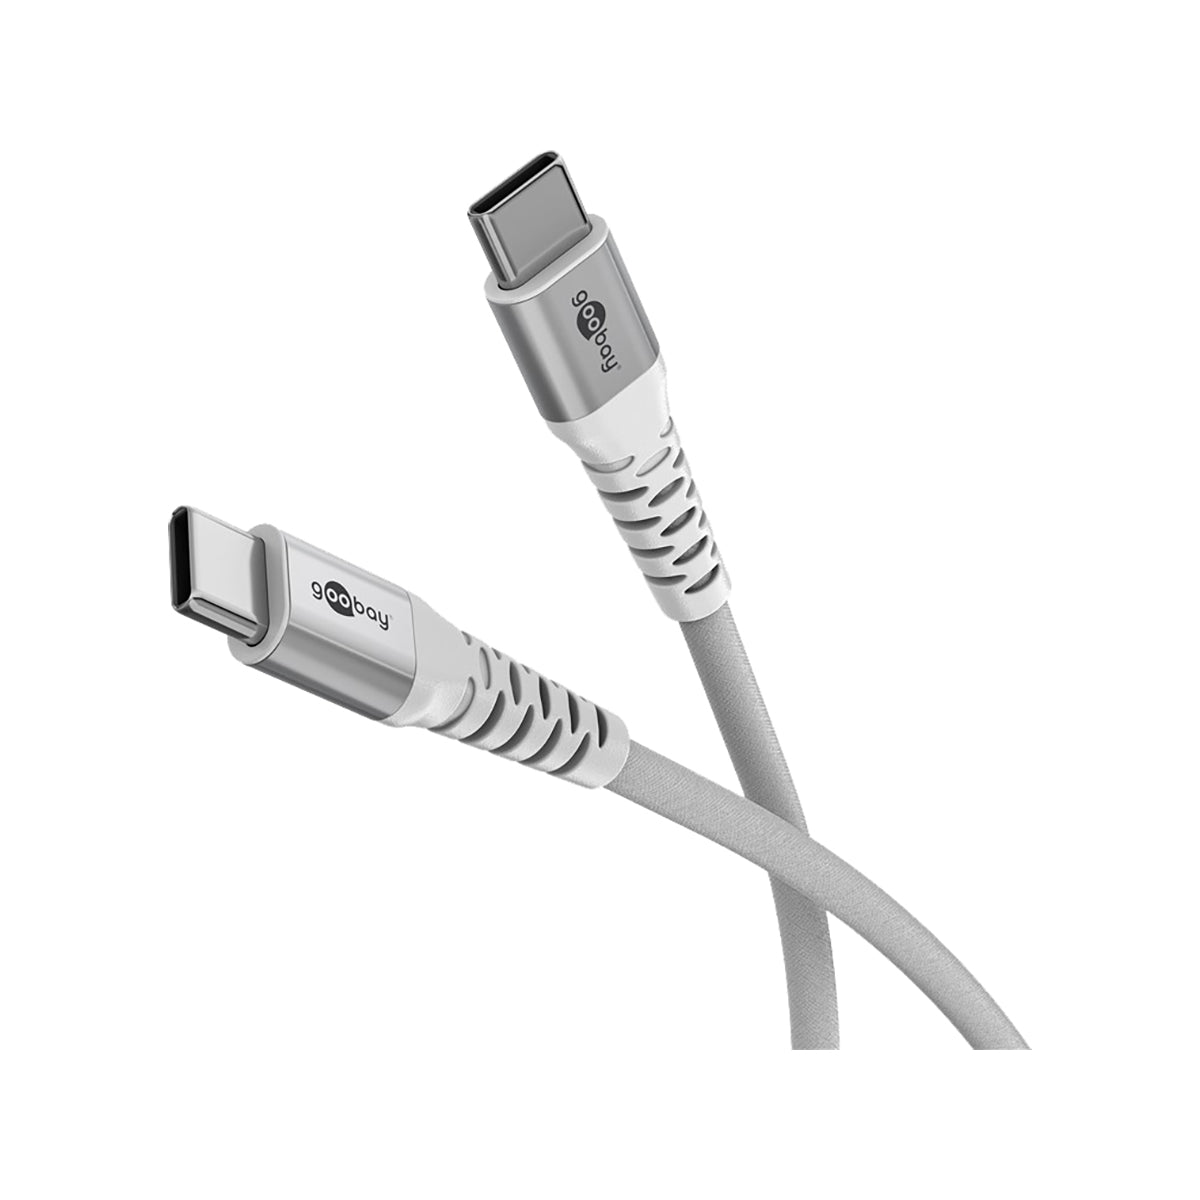 USB-C™ Supersoft Textile Cable with Metal Plugs 1 m for Smartphone/Tablets/Laptops - White